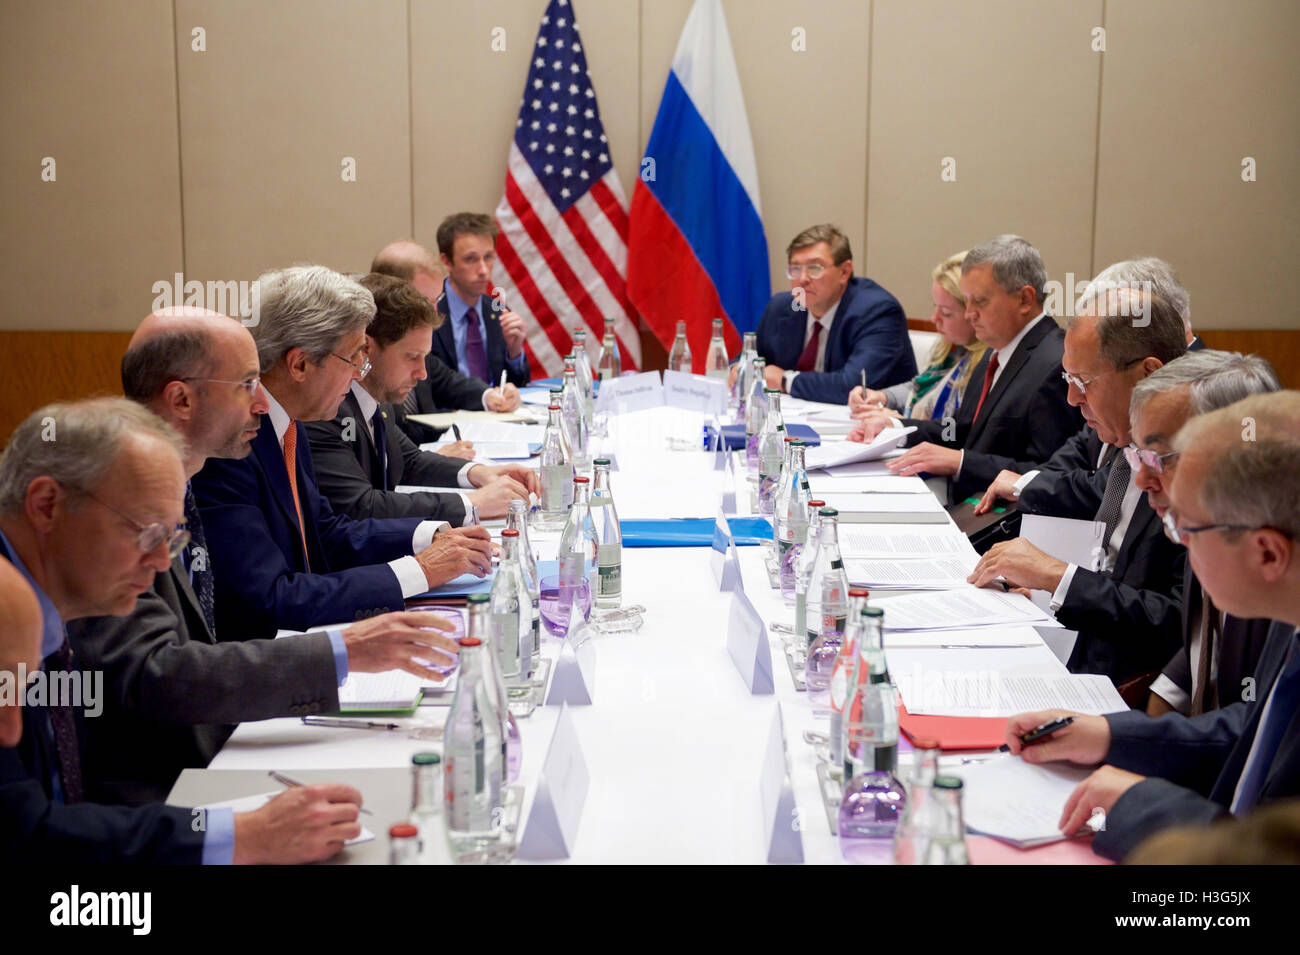 U.S. Secretary of State John Kerry and his delegation sit across from Russian Foreign Minister Sergey Lavrov and their counterparts on September 9, 2016, at the Hotel President Wilson in Geneva, Switzerland, at the outset of a bilateral meeting focused on Syria. Stock Photo